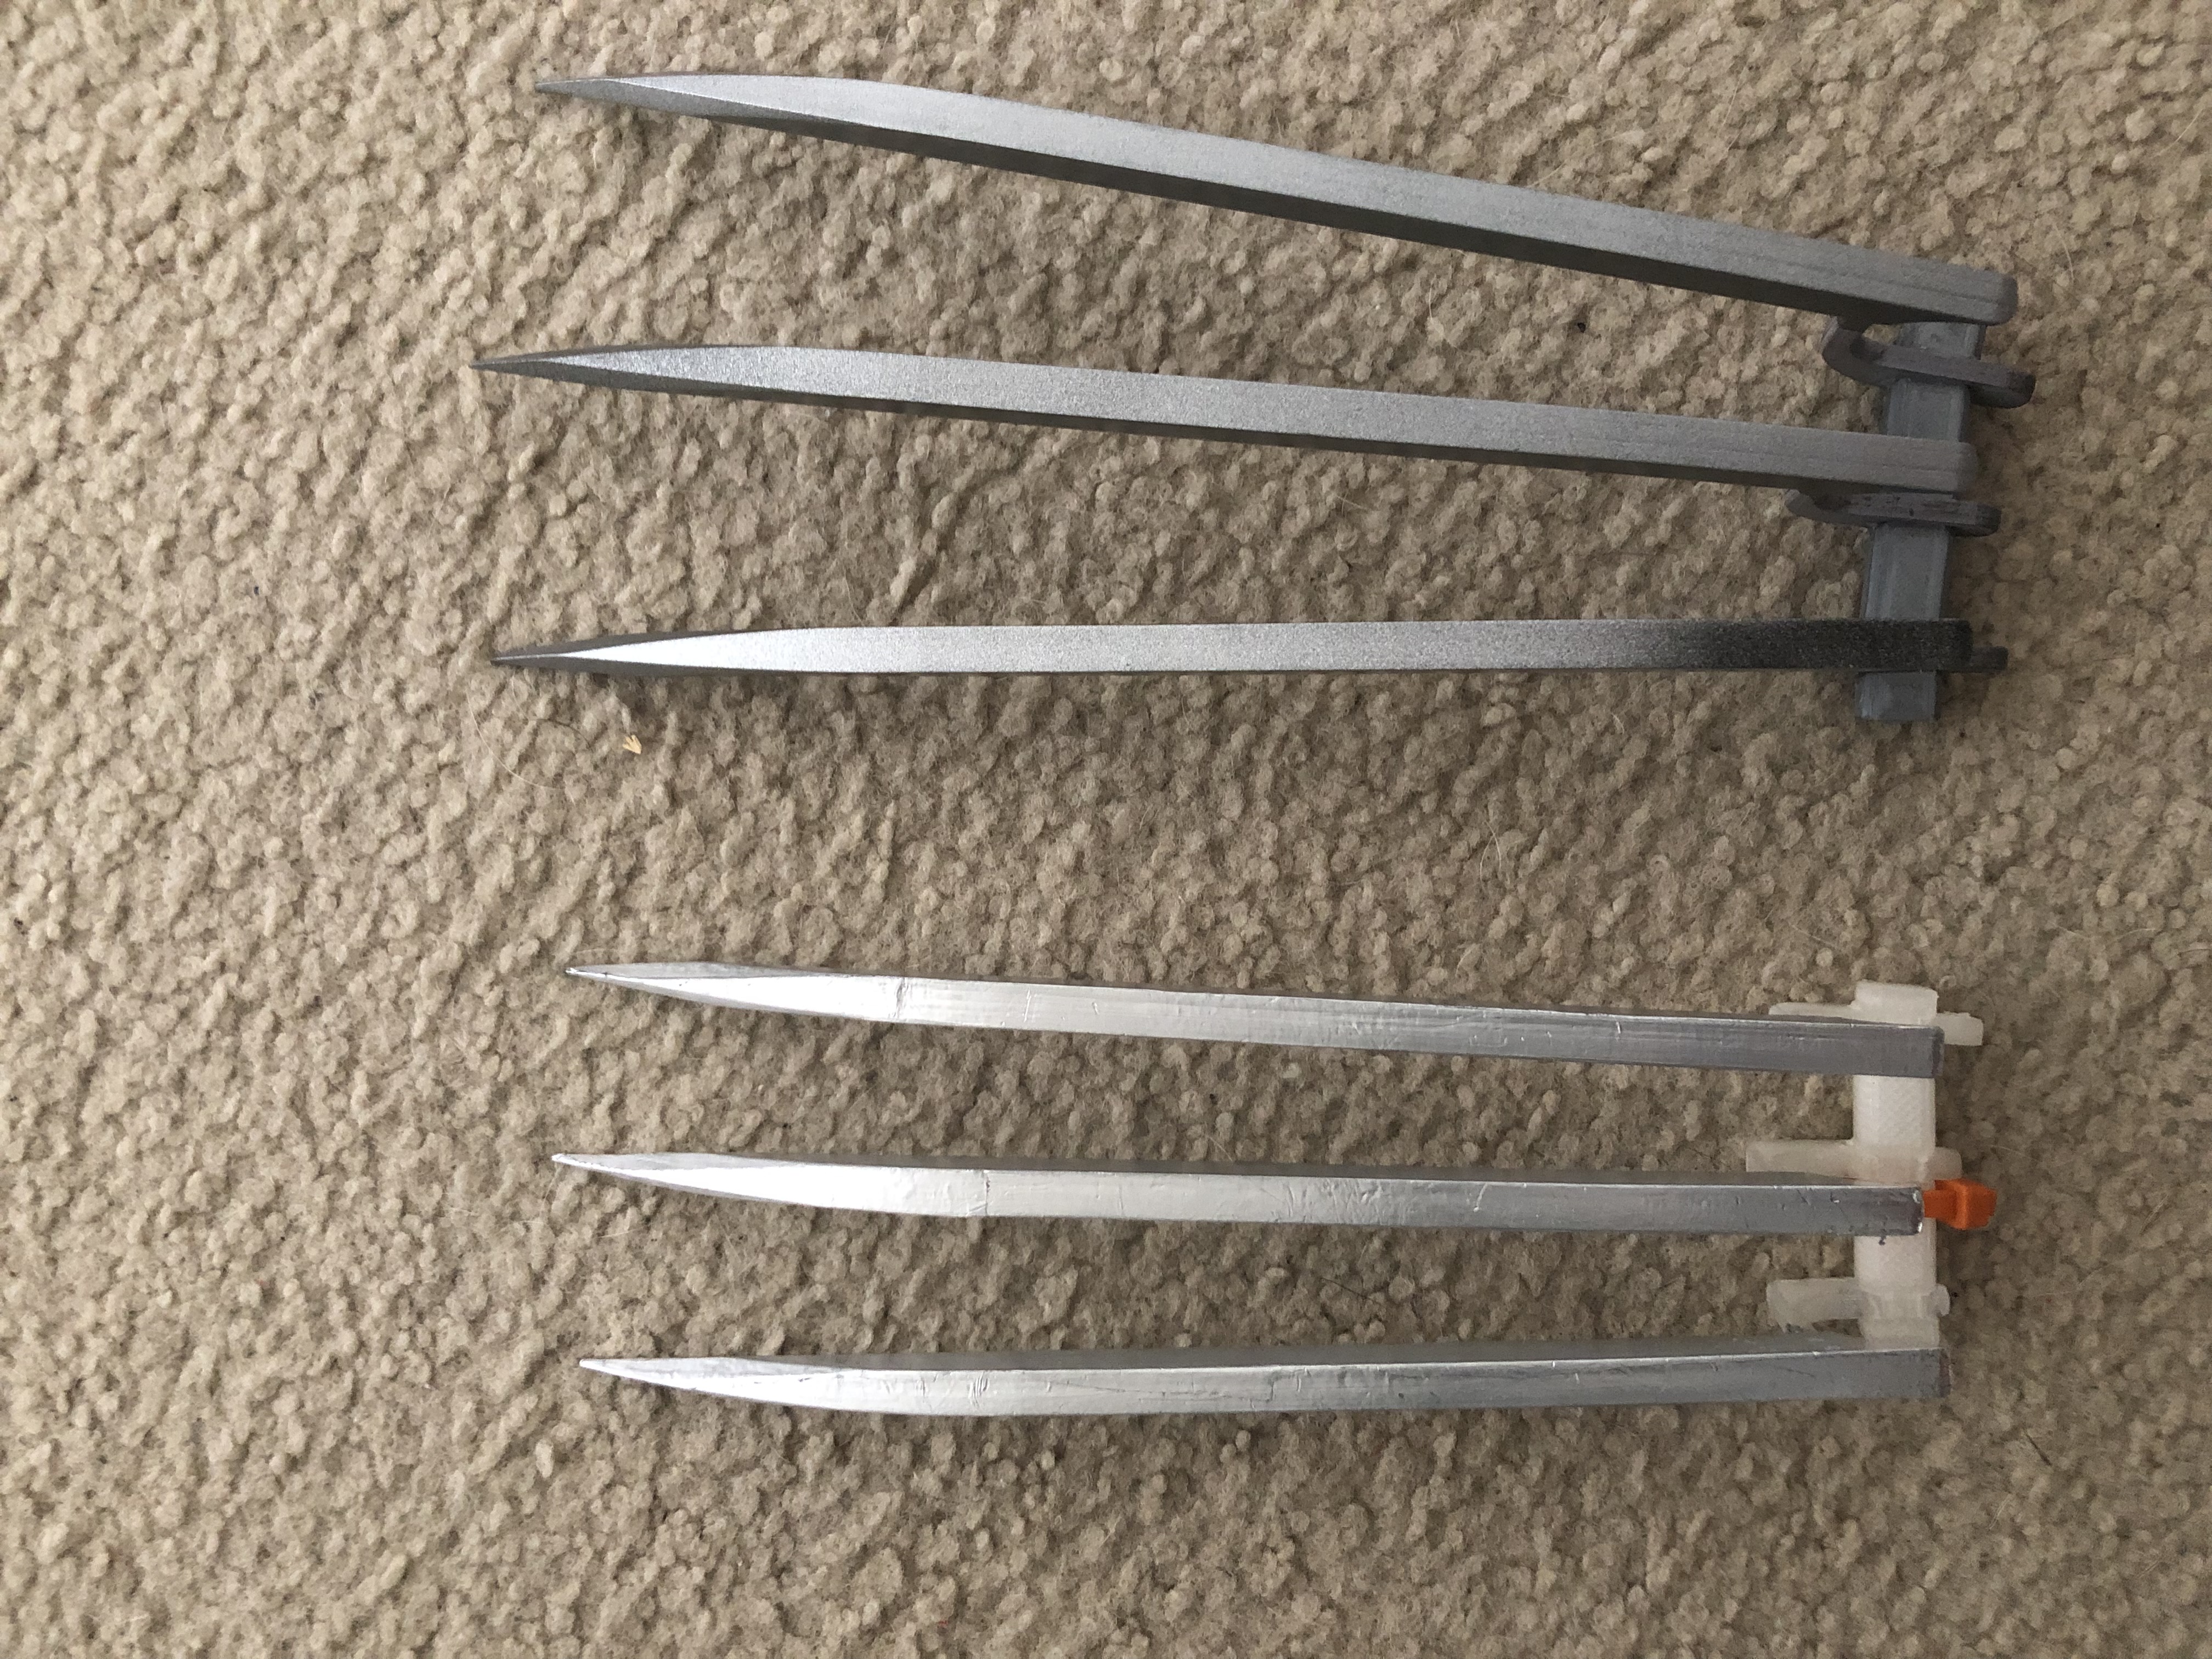 Wolverine Claws for Cosplay